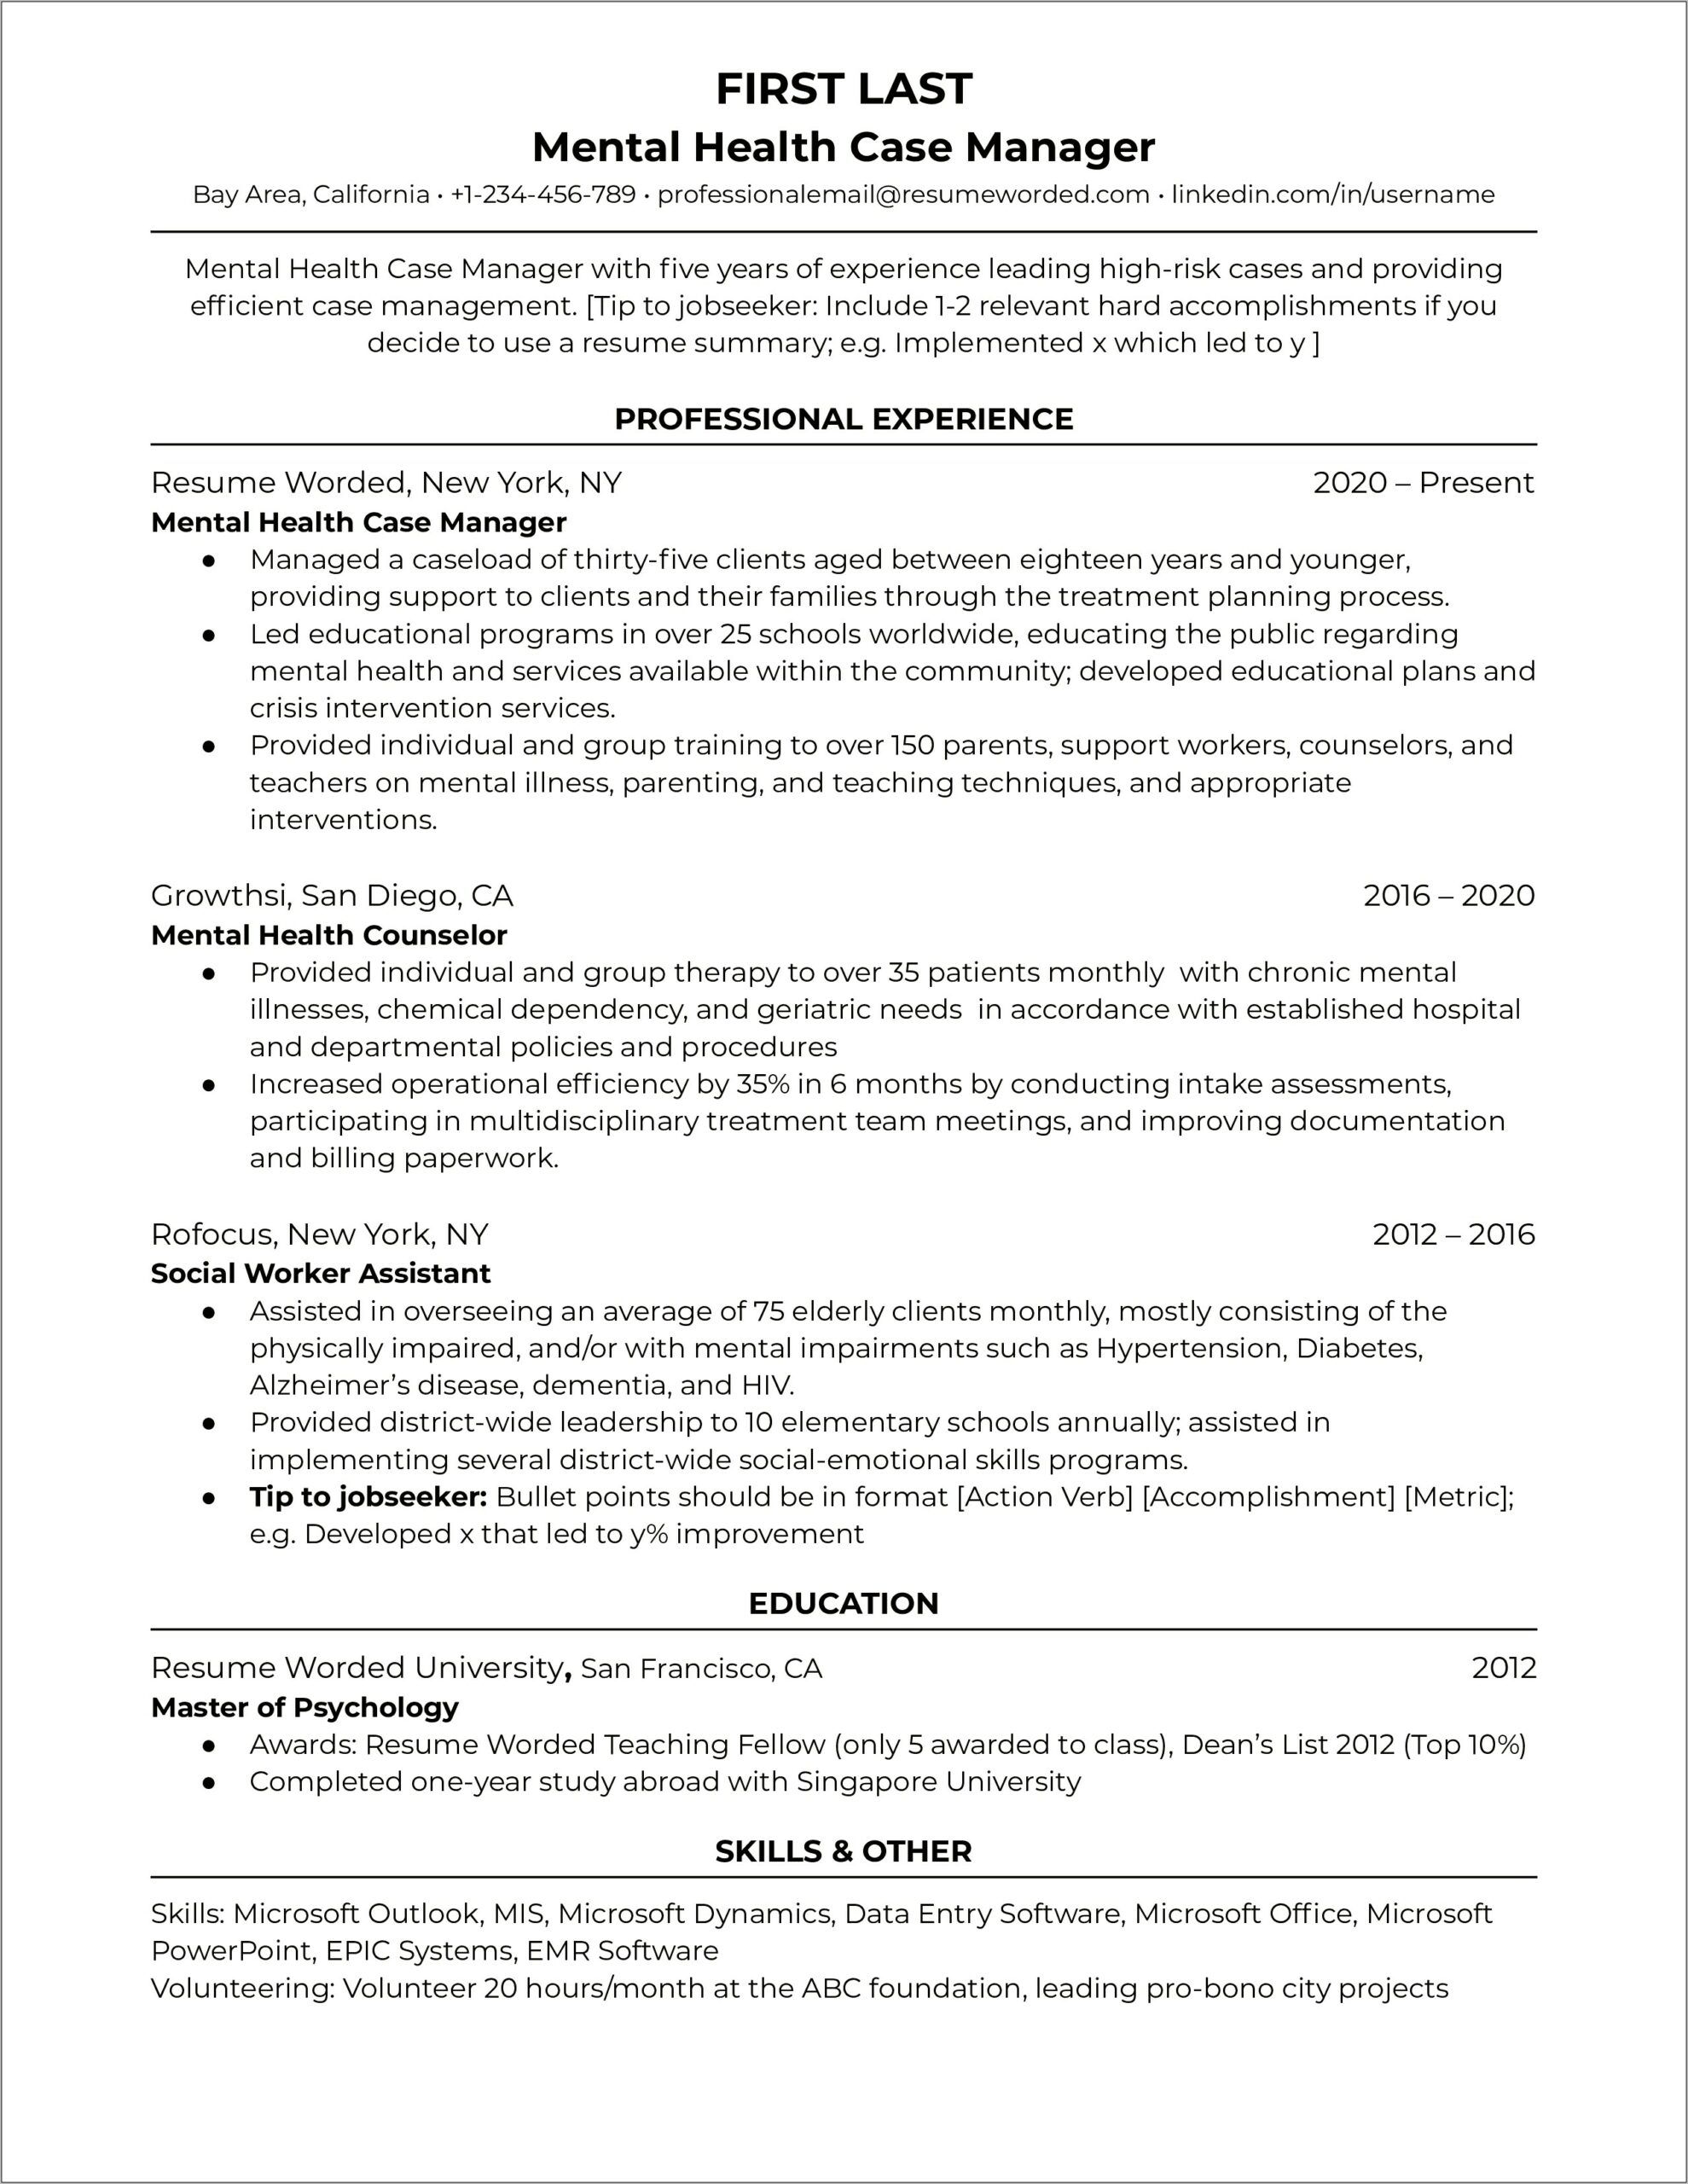 Examples Of Behavioral Health Resumes